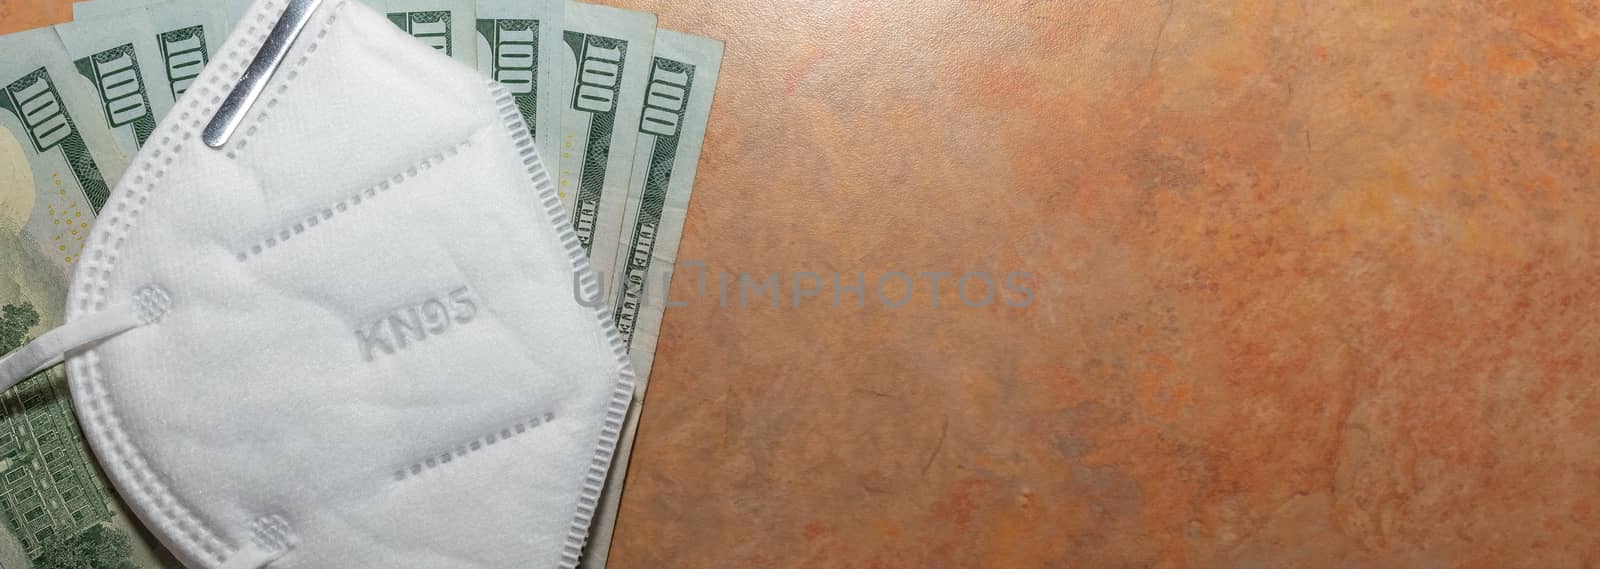 Part of facial protective mask KN95 on top of a few hundred dollar bills. Marble table background. Expensive protection against viruses and bacteria.